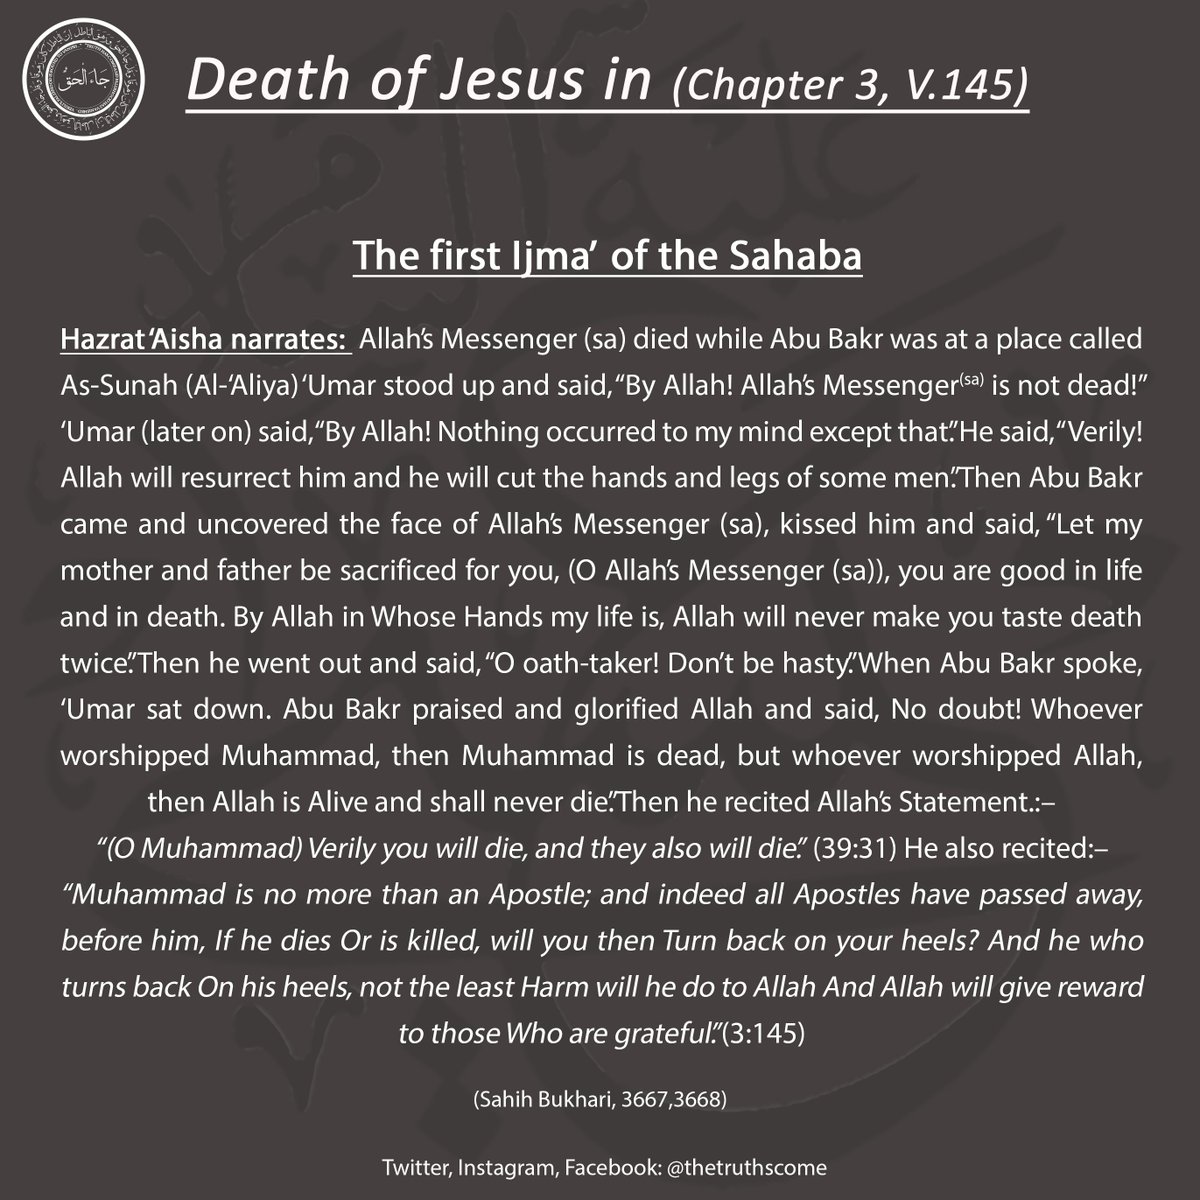 The first Ijma of the Sahaba confirms the death of all Prophets before the Holy Prophet(sa), including Jesus(as).